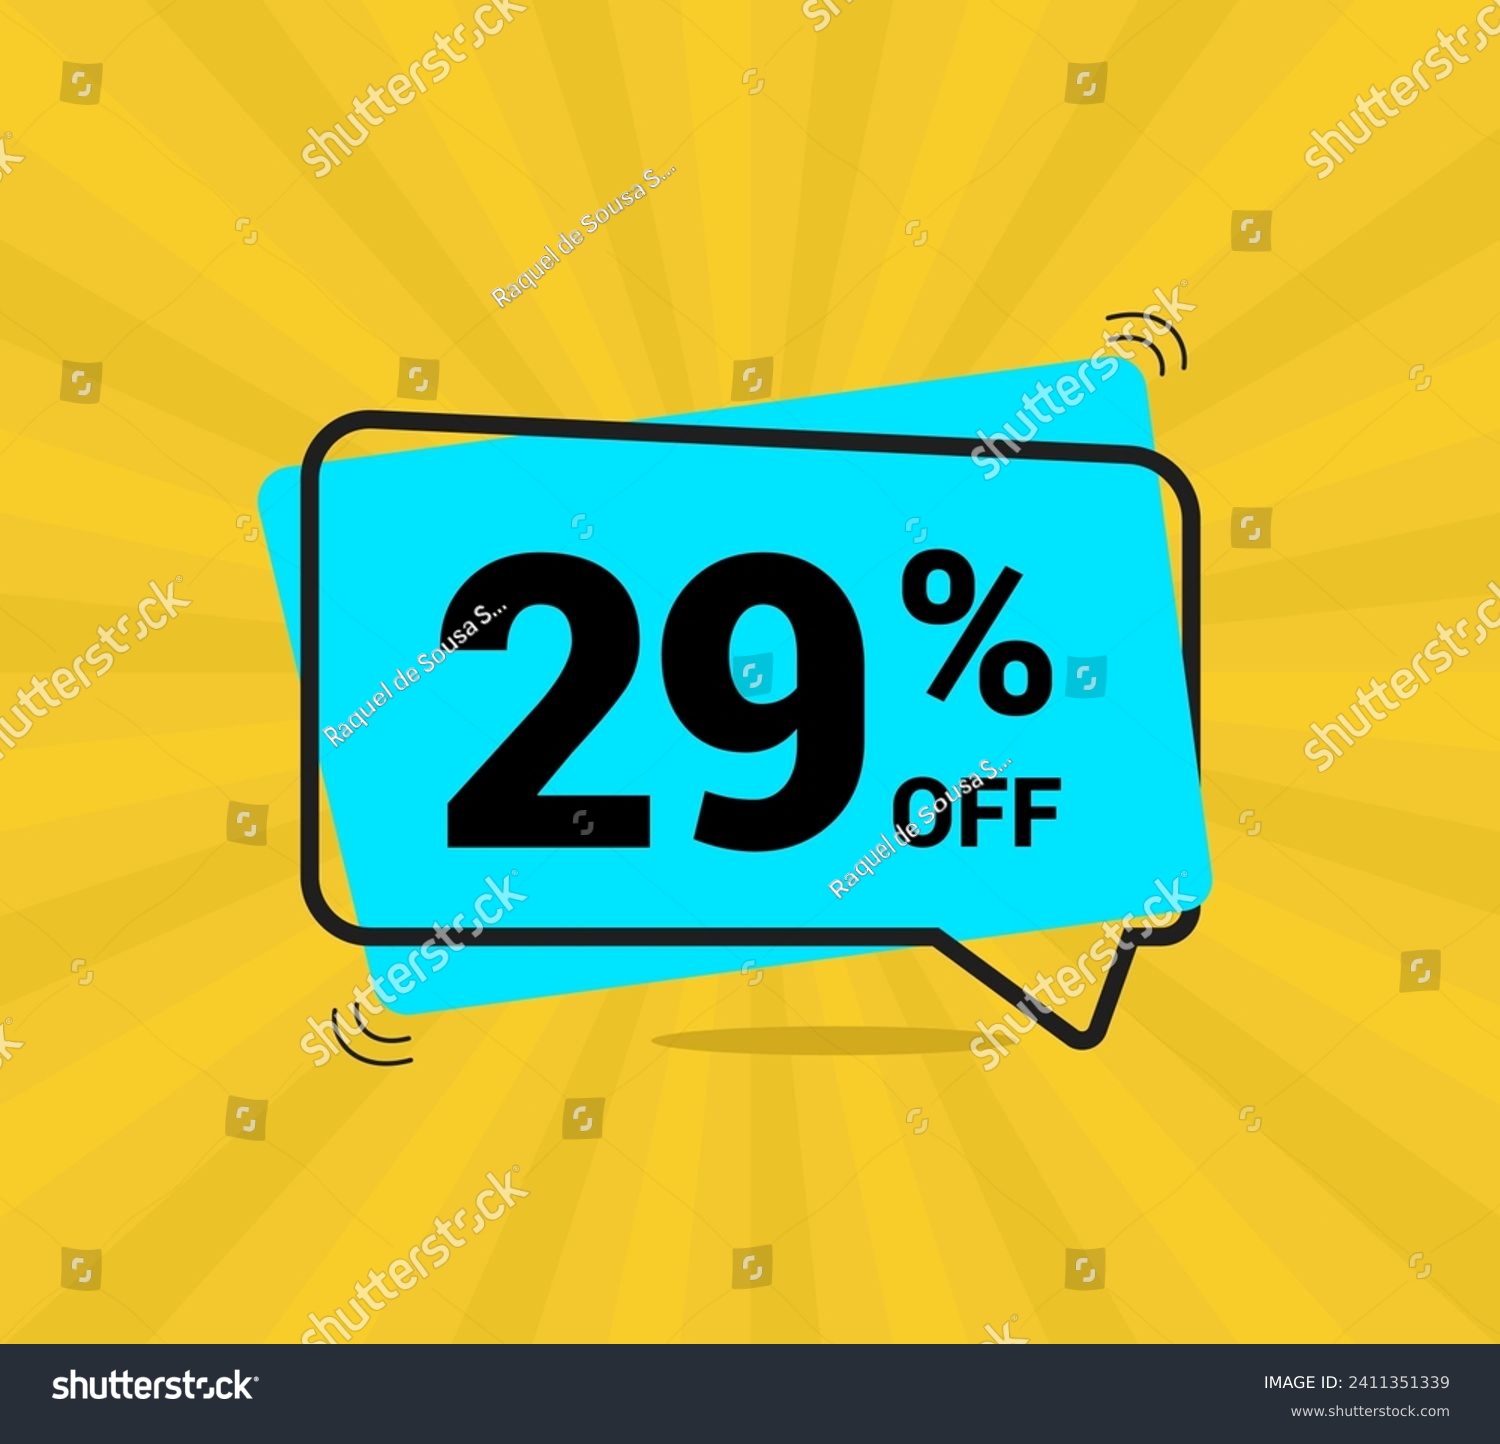 SVG of 29% OFF sale. Coupon of Discount Price. Discount promotion. Banner for twenty nine percent off offers. Yellow and blue Design Template Concept. Vector illustration. svg